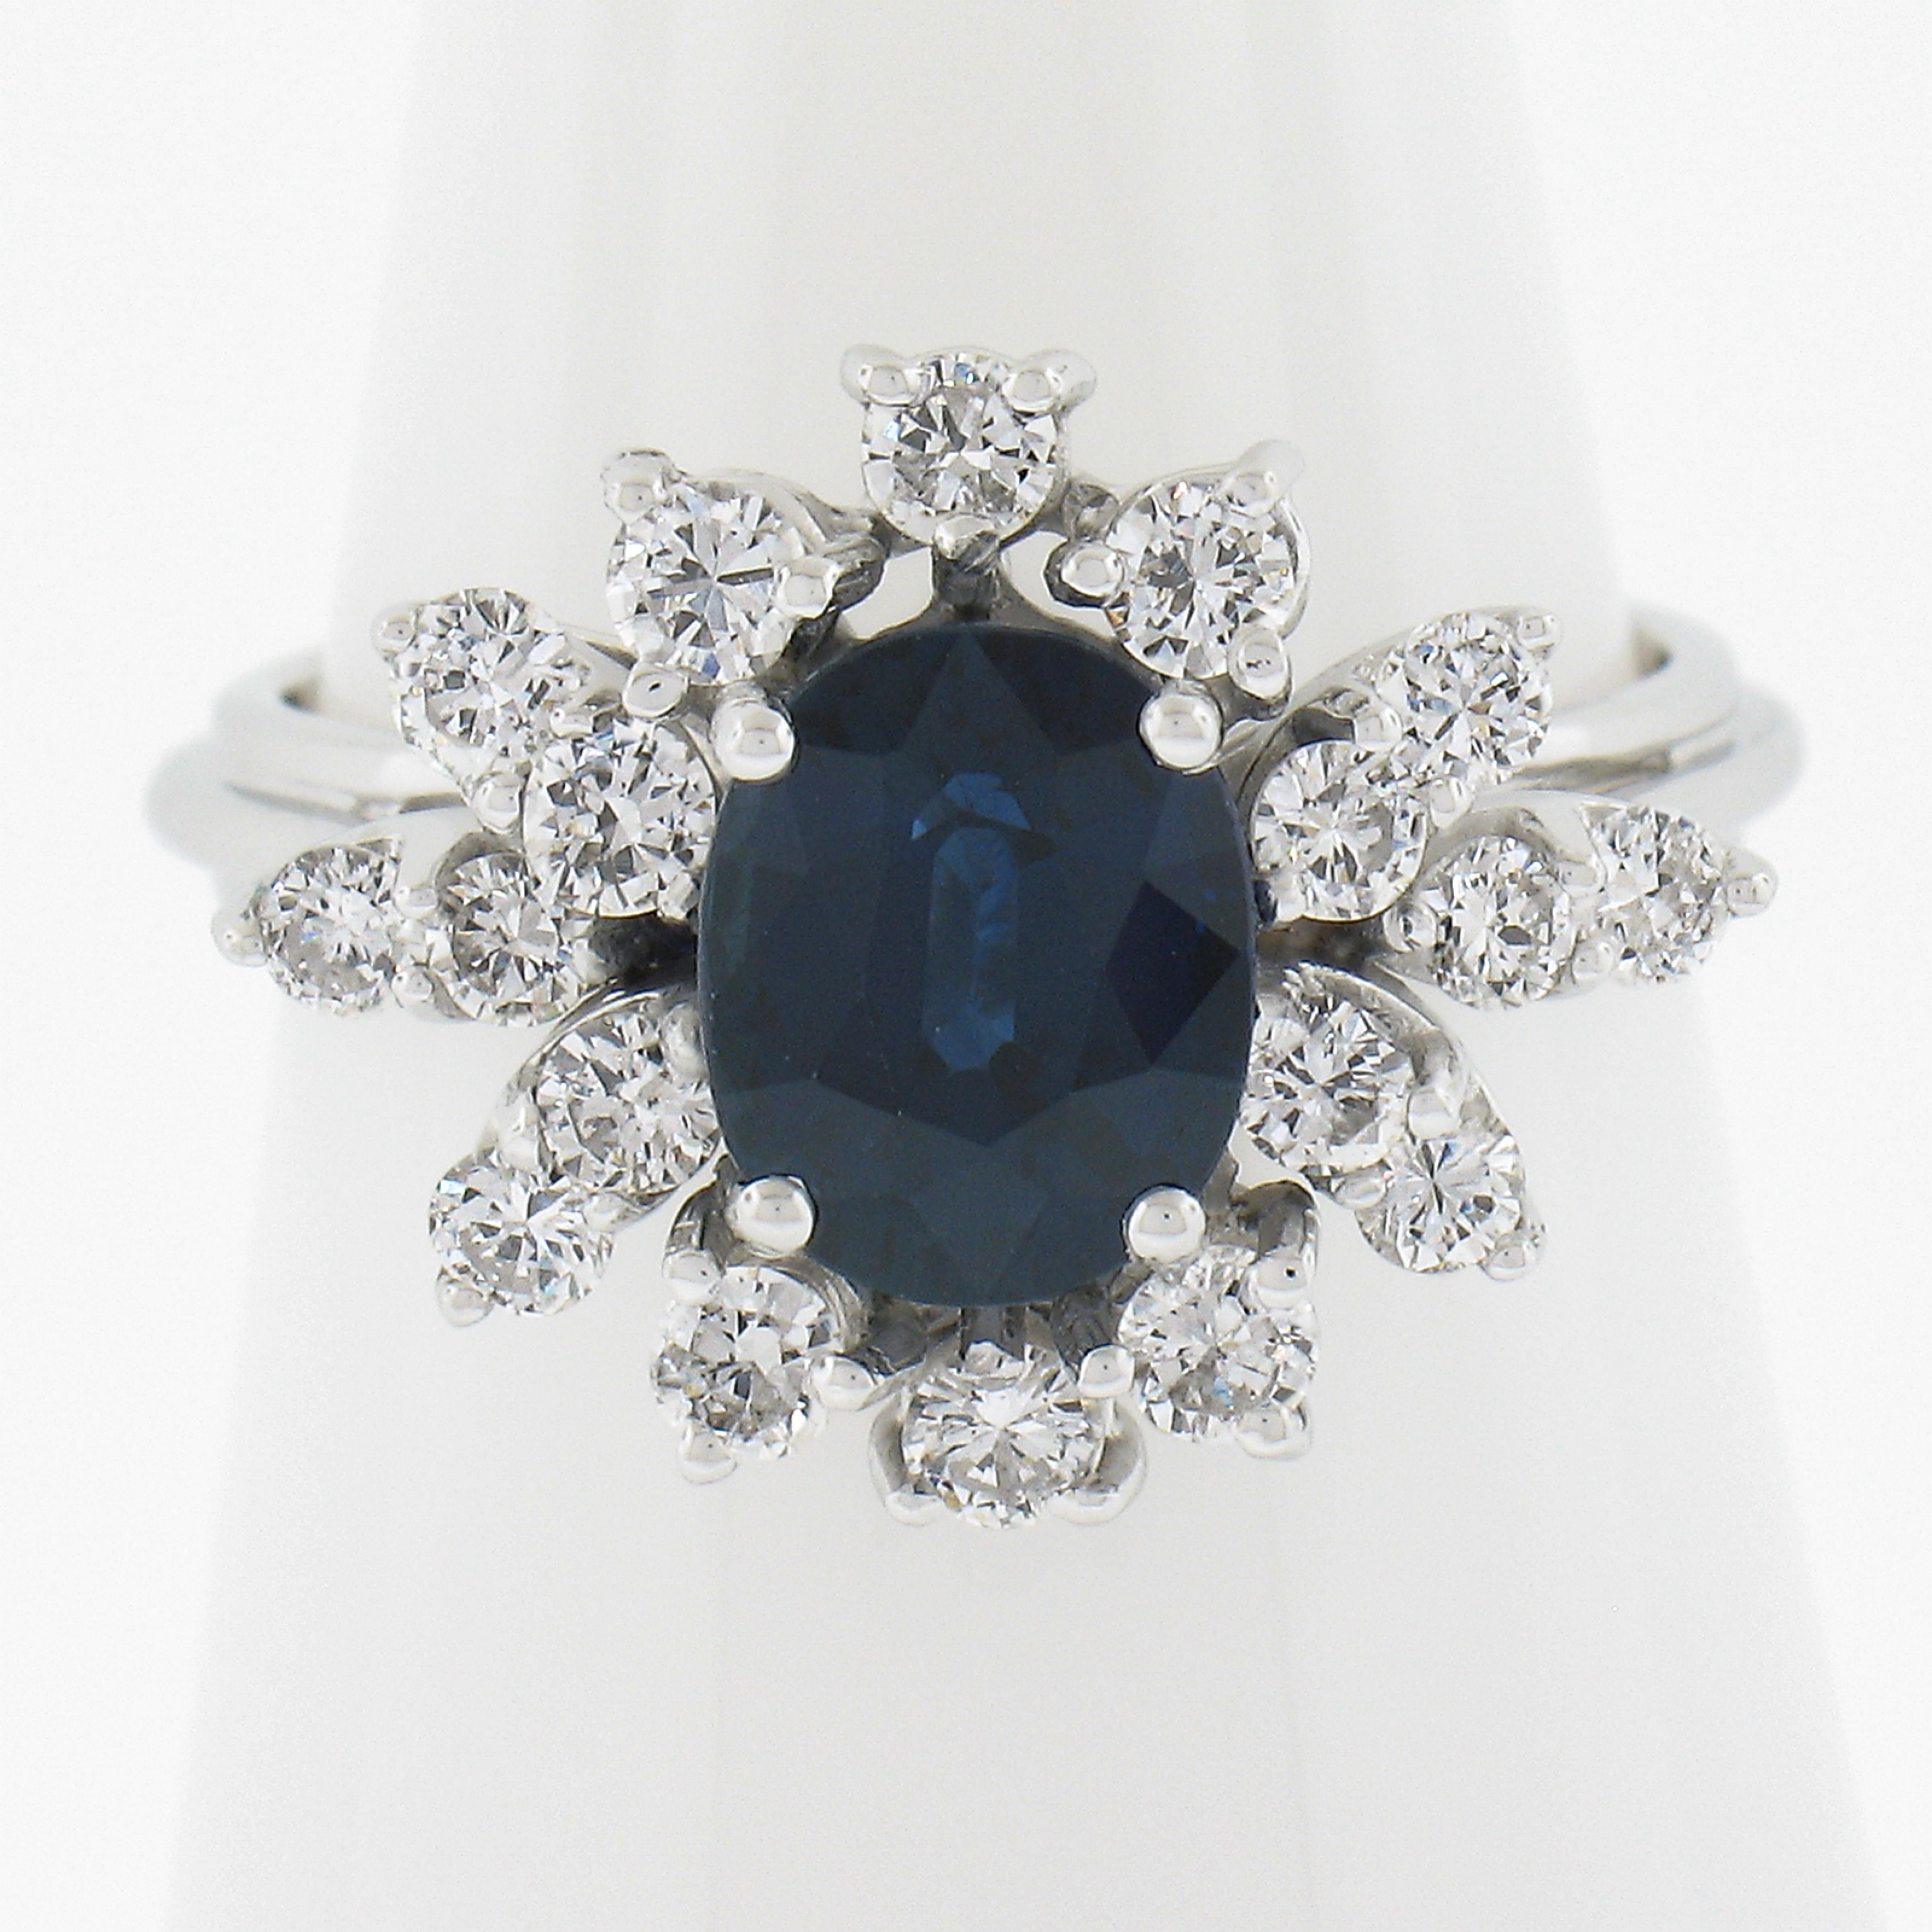 --Stone(s):--
(1) Natural Genuine Sapphire - Oval Brilliant Cut - Prong Set - Royal Blue Color - HEATED - 1.84ct (exact, certified)
*See Certification Details Below for Full Info* 
(18) Natural Genuine Diamonds - Round Brilliant & Old Transitional